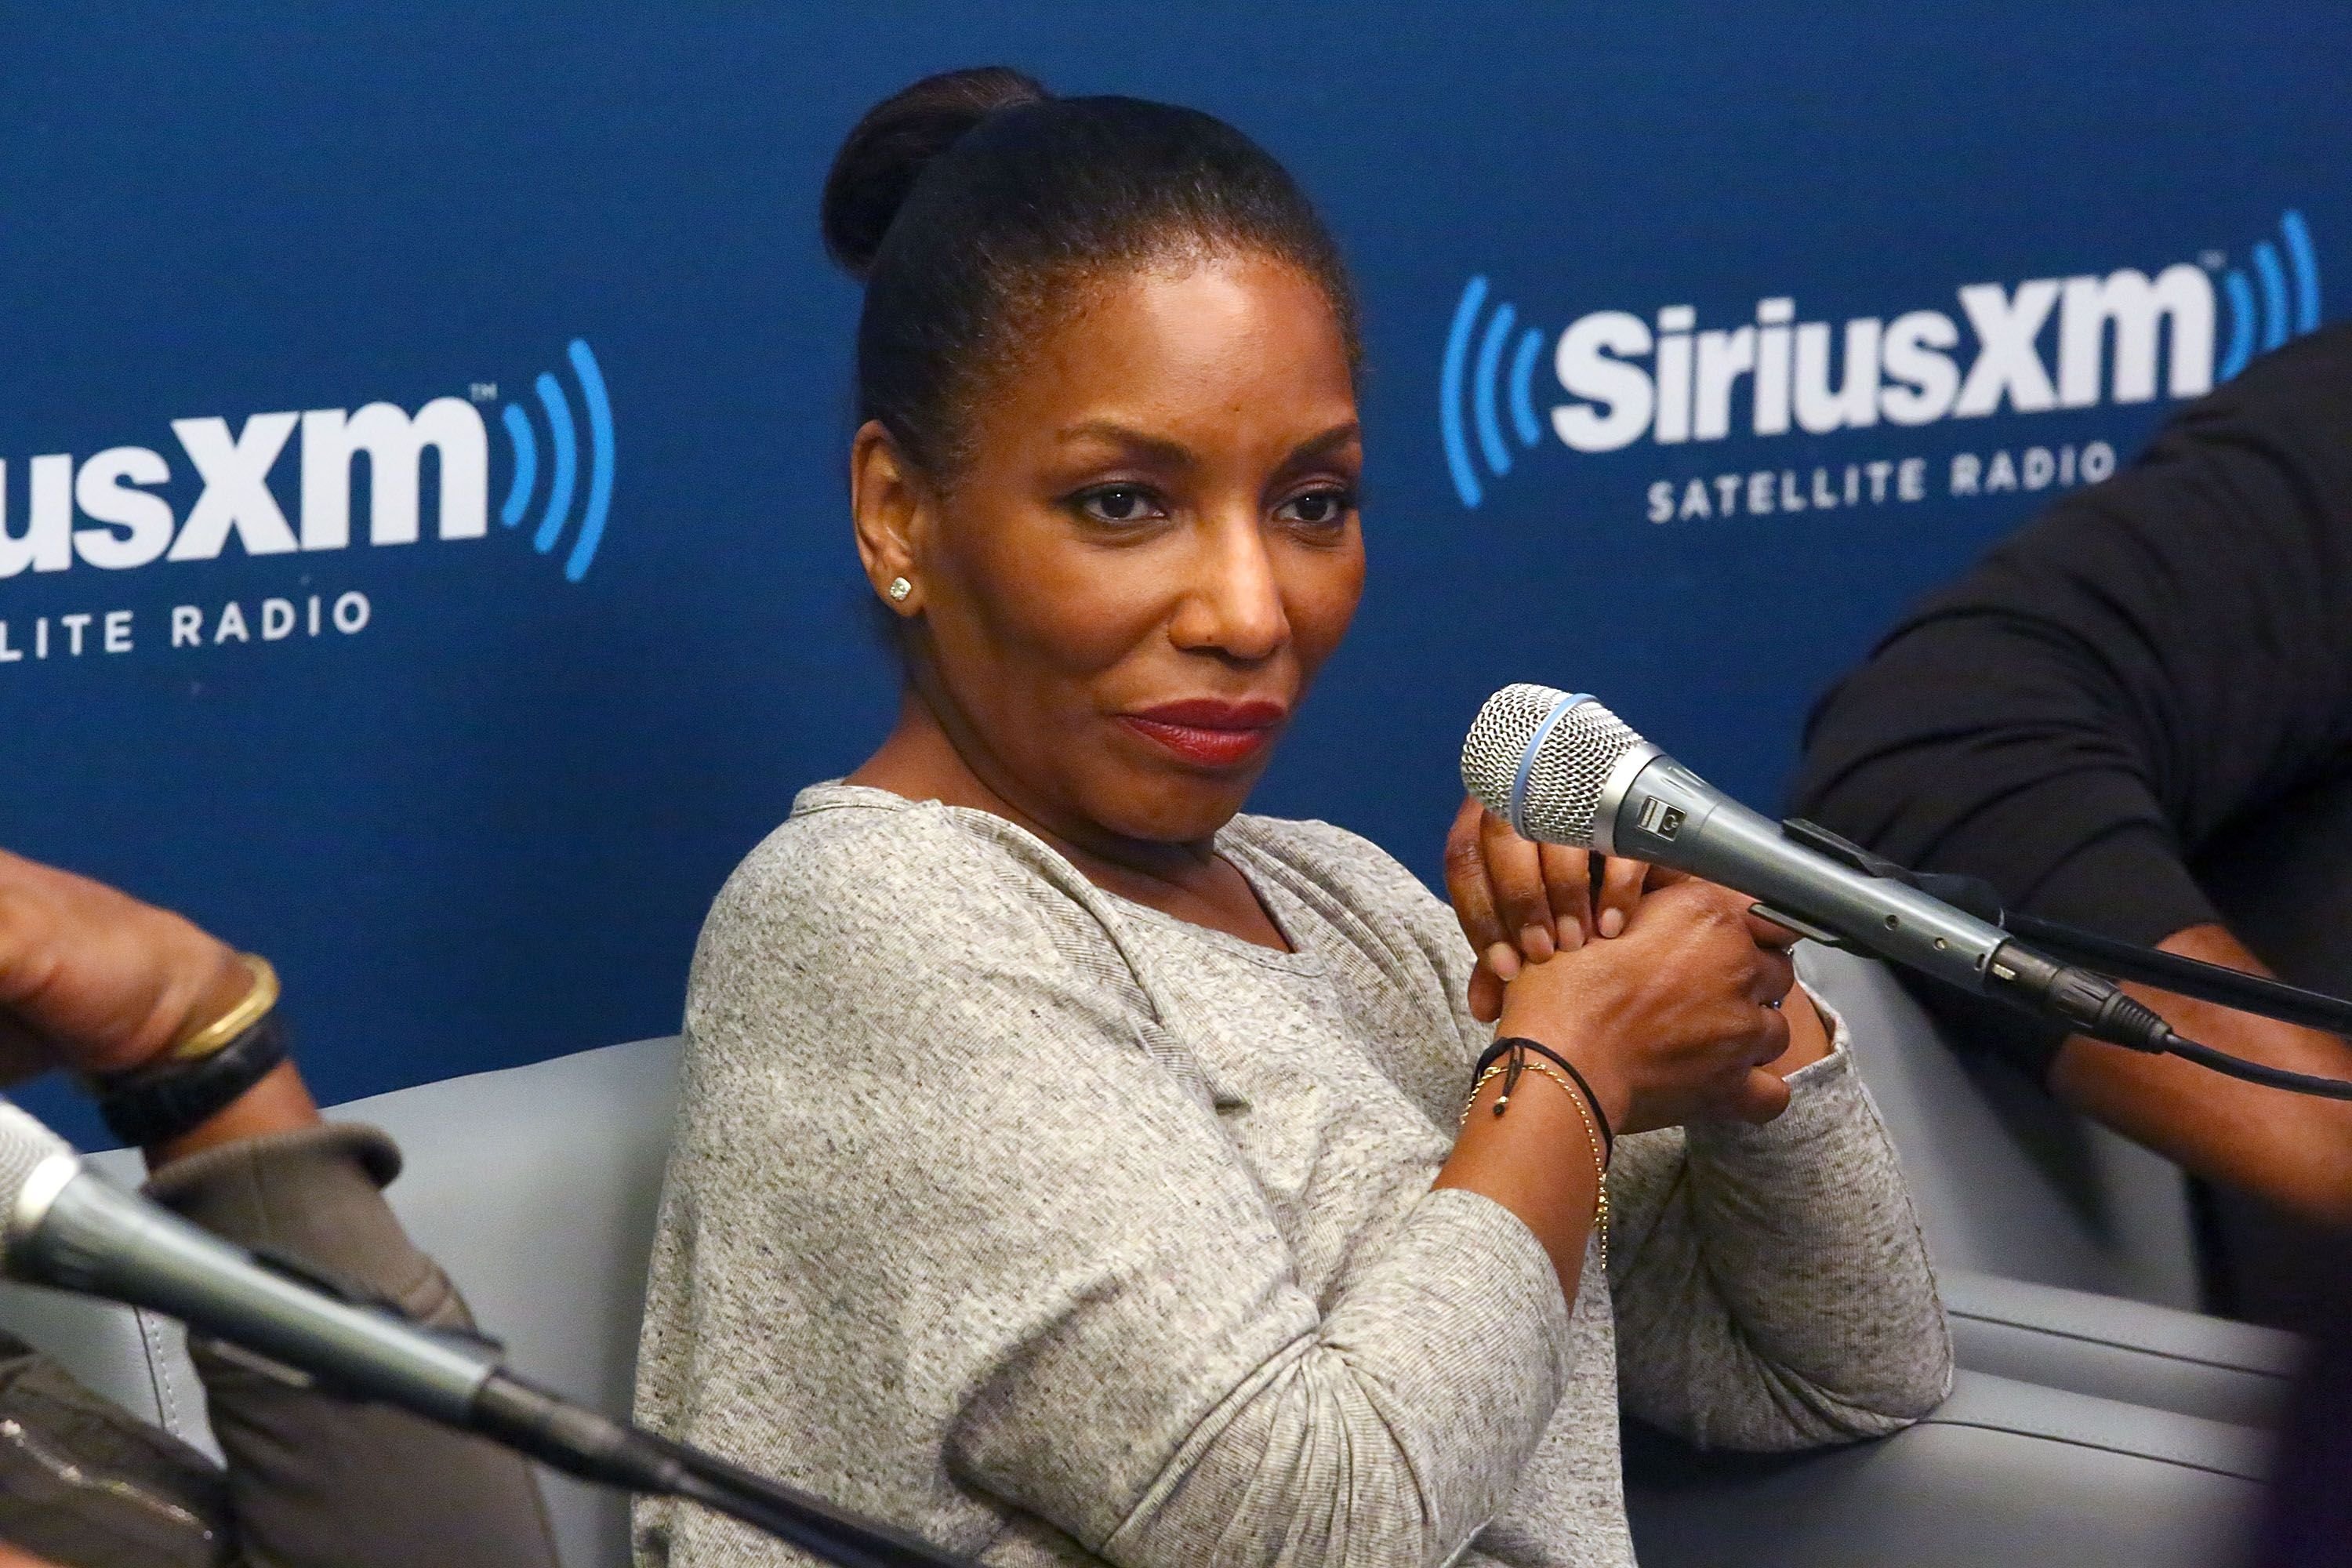 Stephanie Mills attends SiriusXM's Town Hall with the cast of 'The Wiz' hosted by Radio Andy host Bevy Smith at the SiriusXM Studios on October 26, 2015 in New York City. | Source: Getty Images